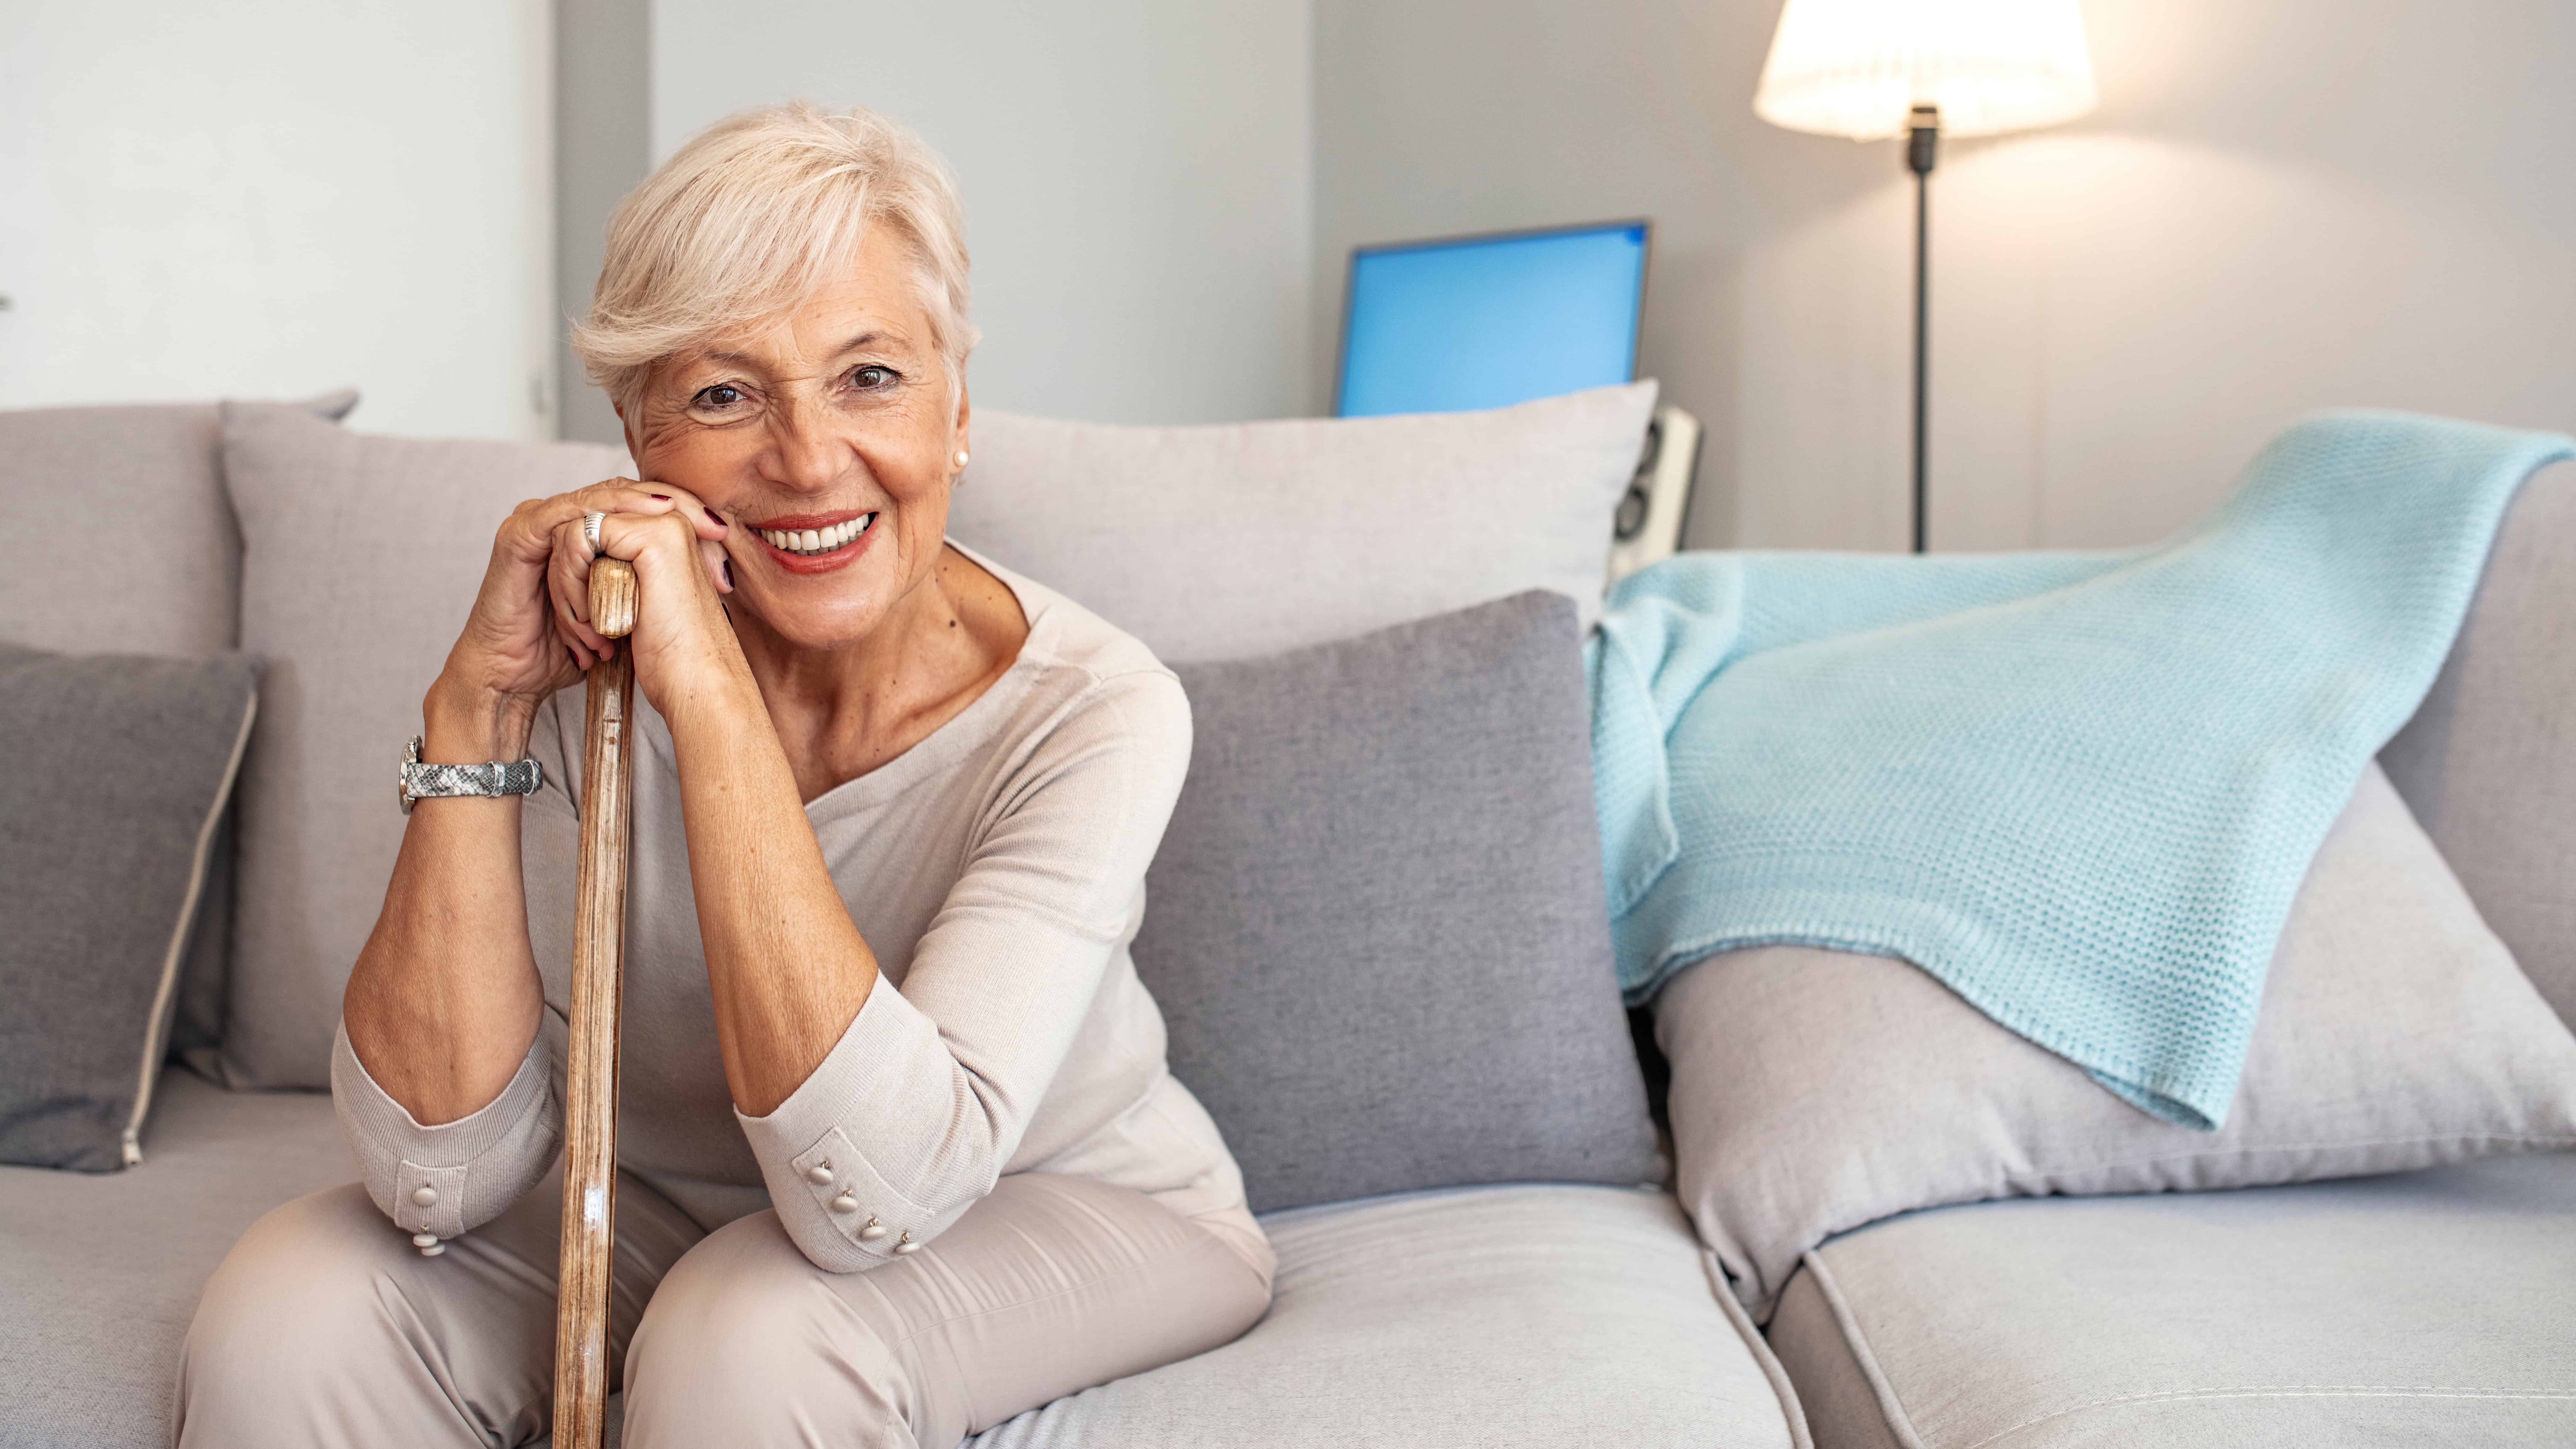 Senior woman smiling with dentures sitting on couch holding cane.